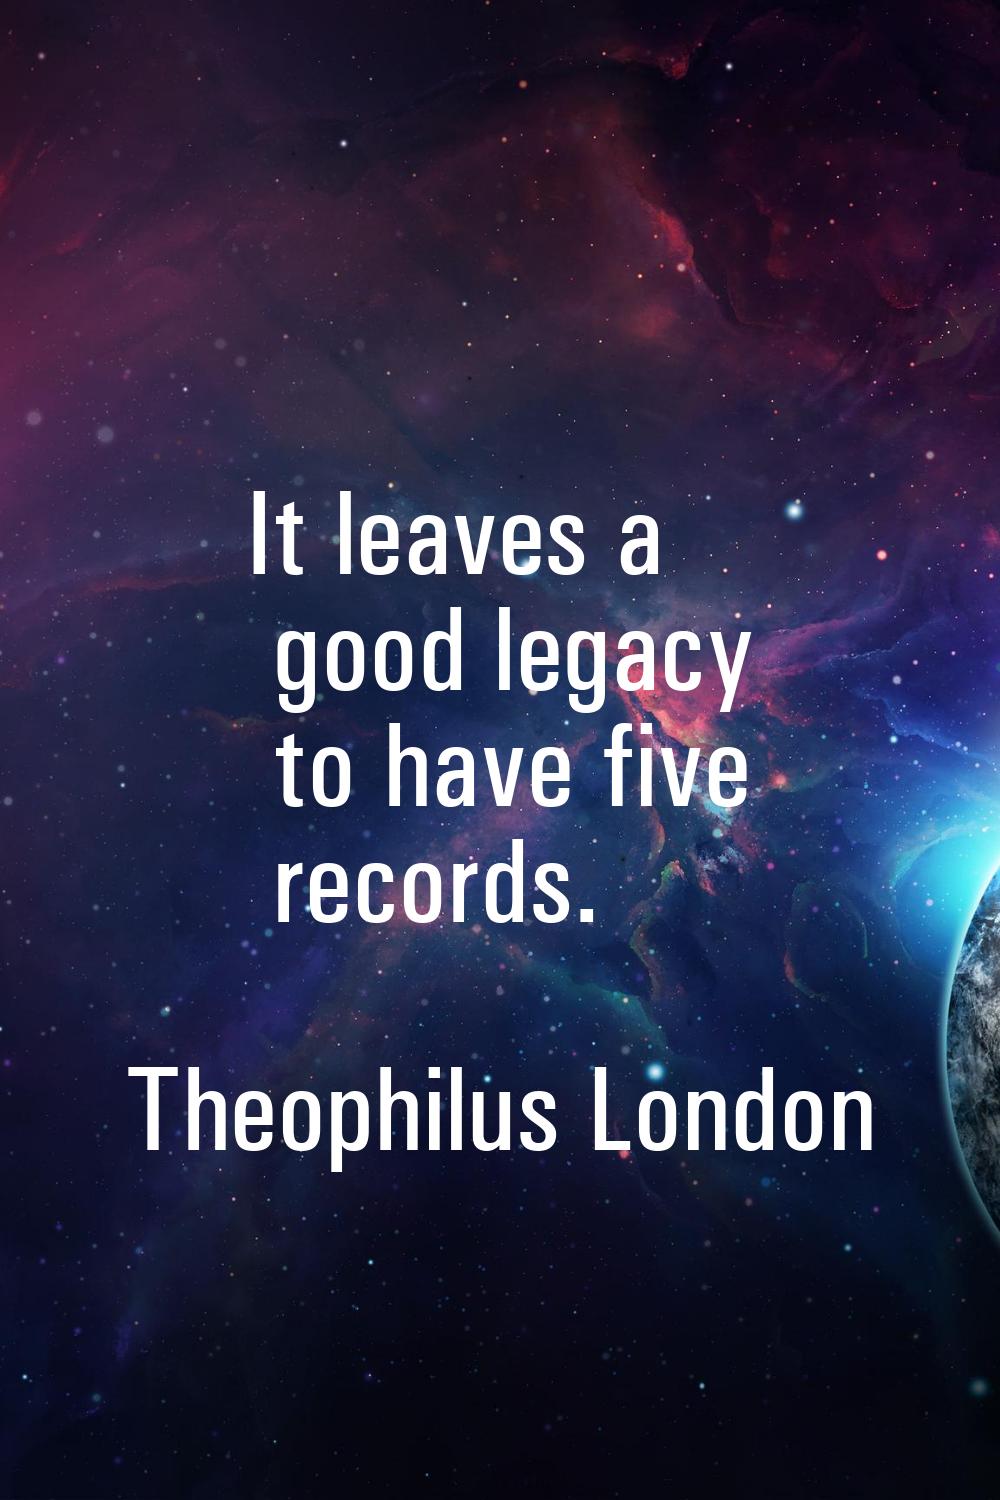 It leaves a good legacy to have five records.